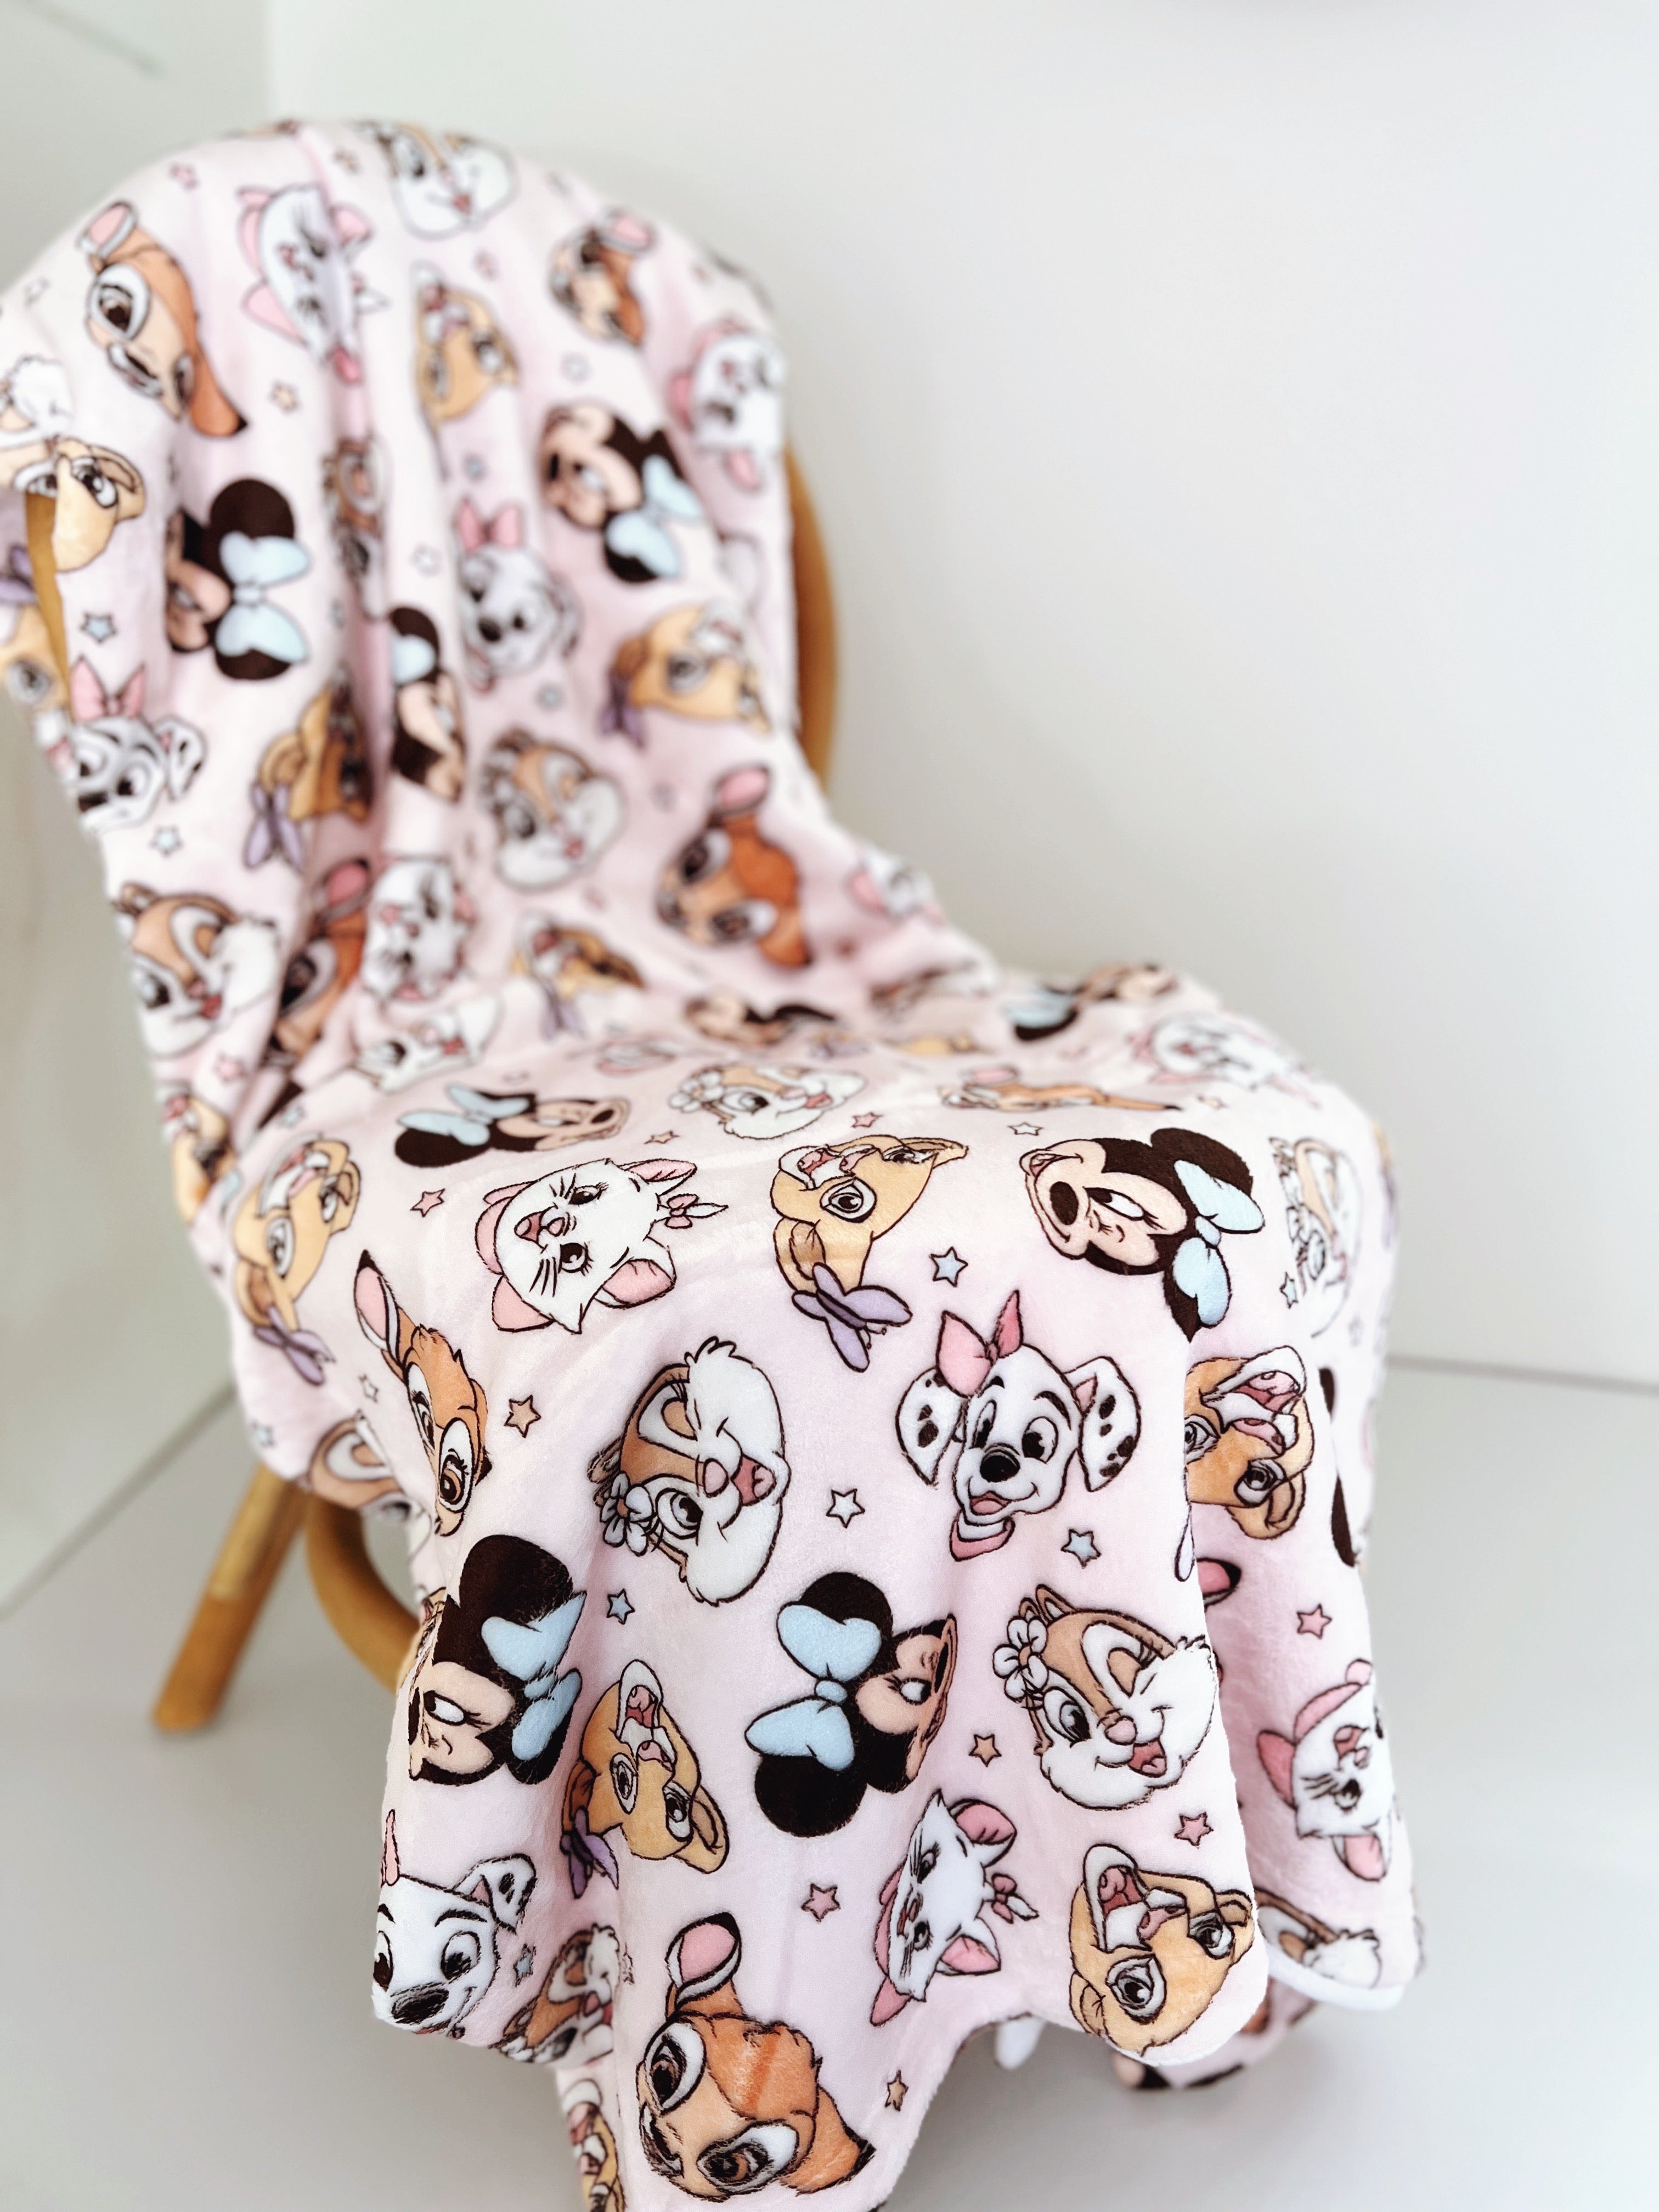 Made to Order Minky Blanket - Minnie + Friends